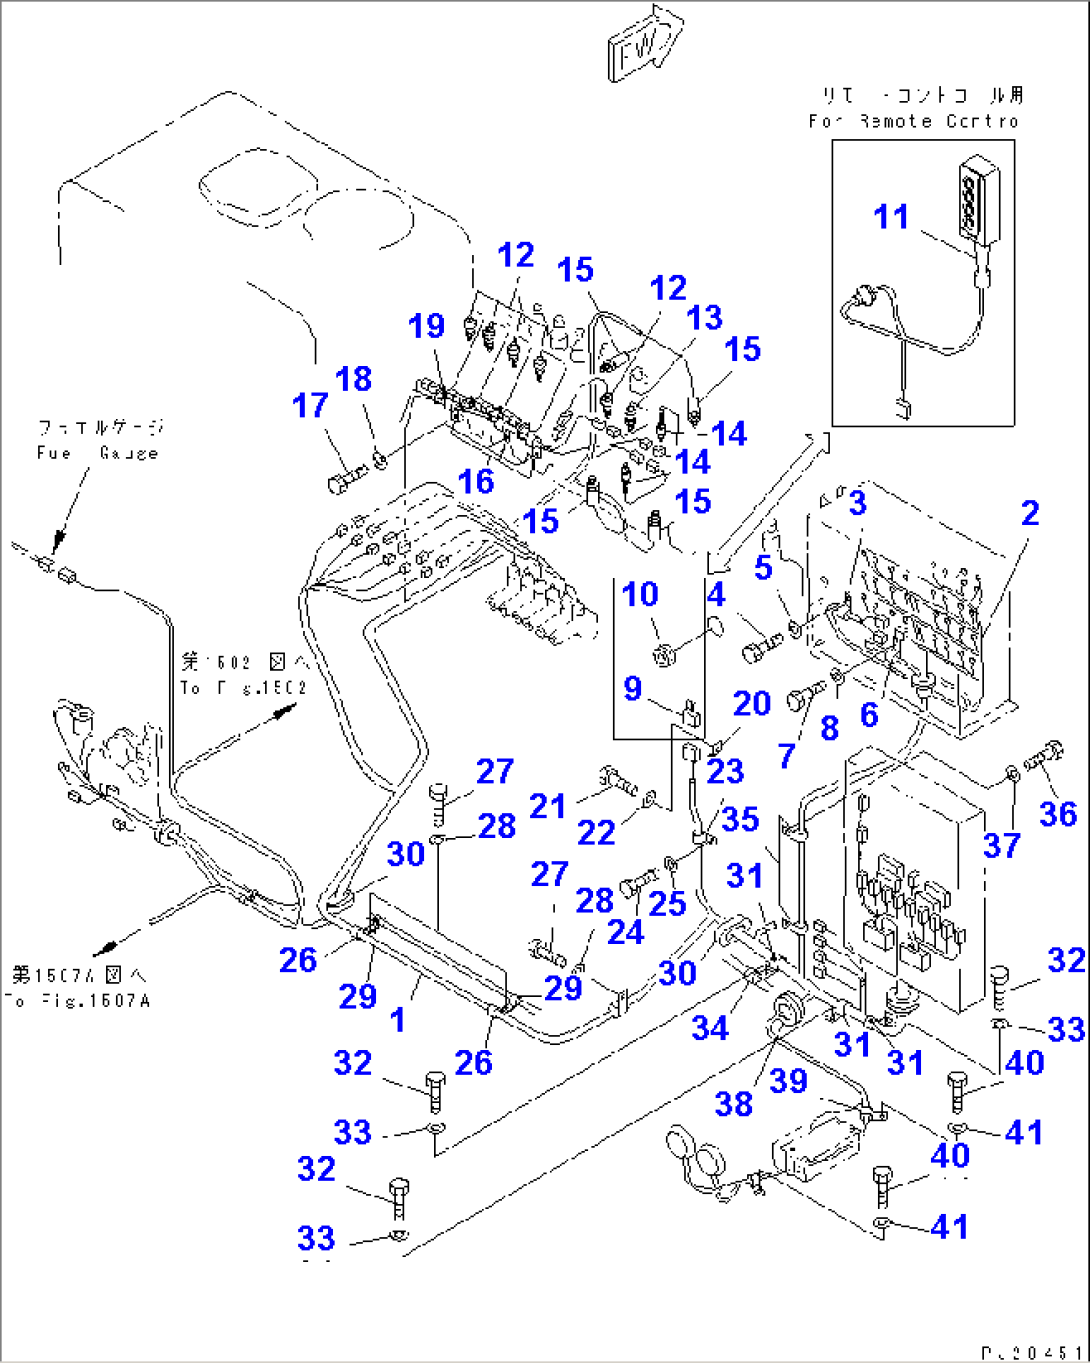 ELECTRICAL SYSTEM (MAIN HARNESS) (1/2)(#1501-)